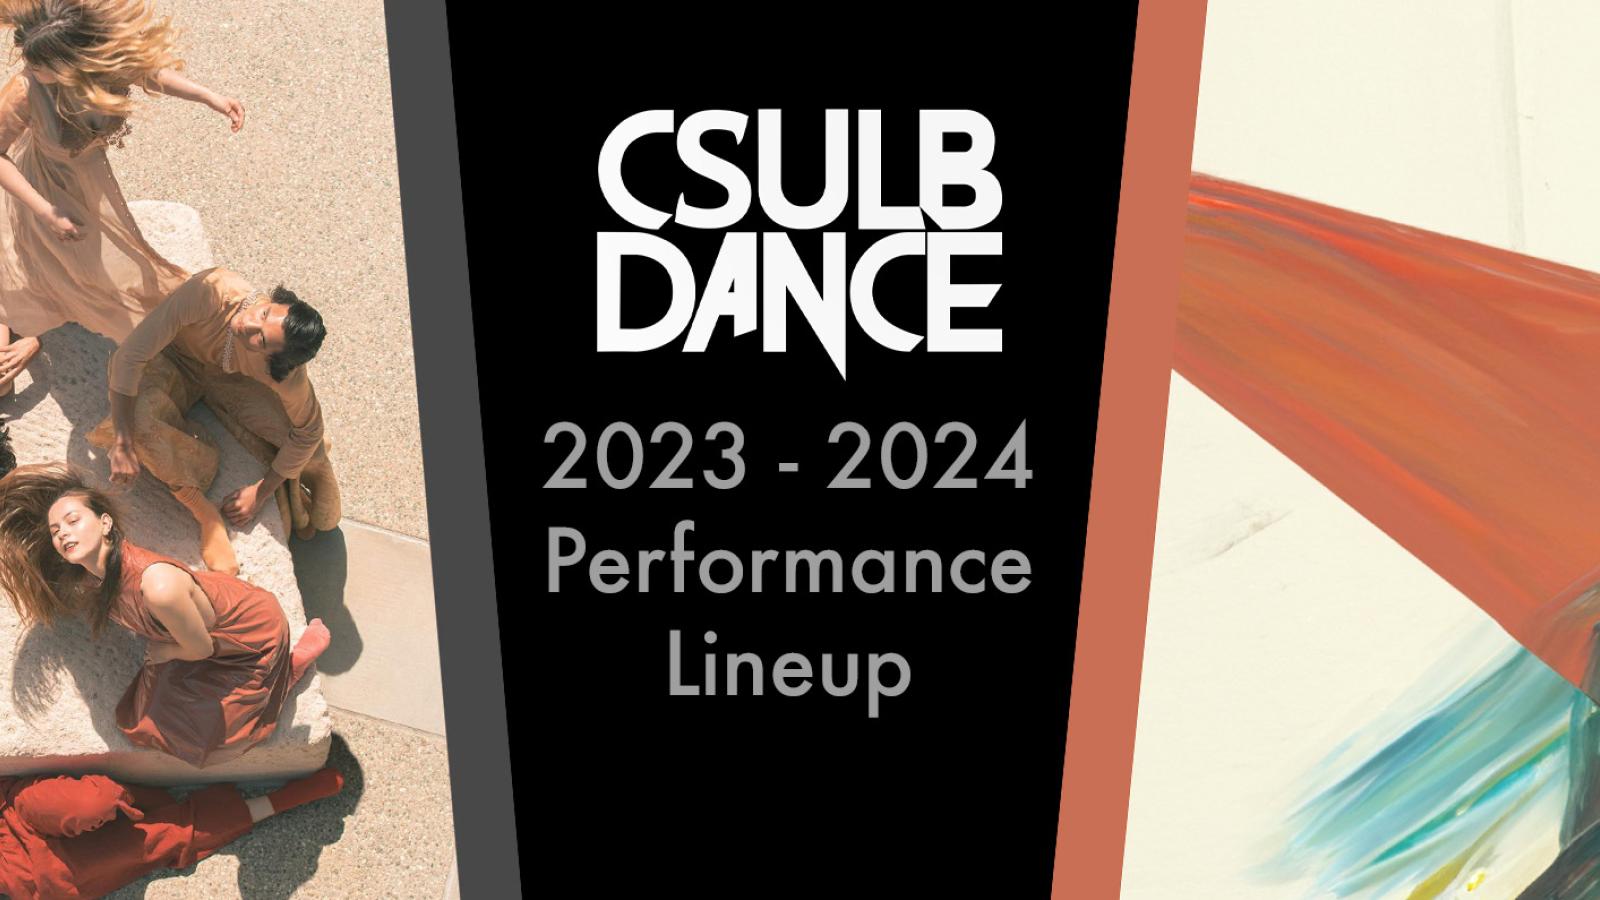 "CSULB Dance 2023 - 2024 Performance Lineup" in grey against black - Two sections of concert posters exposed